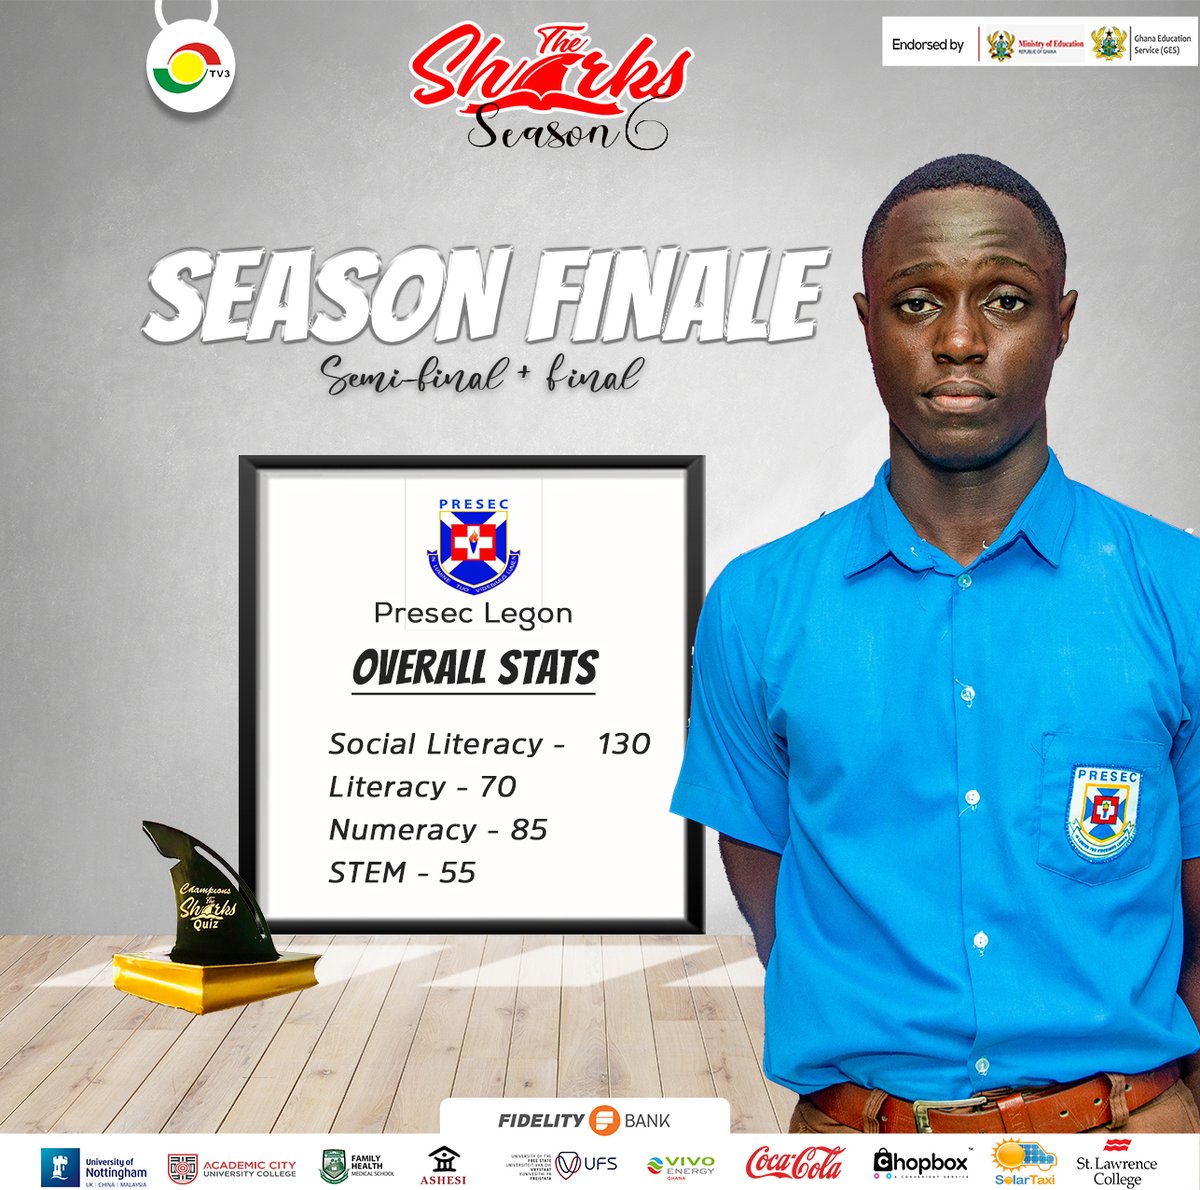 Season Finale!

PRESEC Legon has looked the brightest in Literacy and Numeracy in the Round of 16 and Quarterfinals of this season's Sharks Quiz.

Can they produce the same in the semifinal tomorrow, June 24, 2023?

#TheSharks
#Sharks6